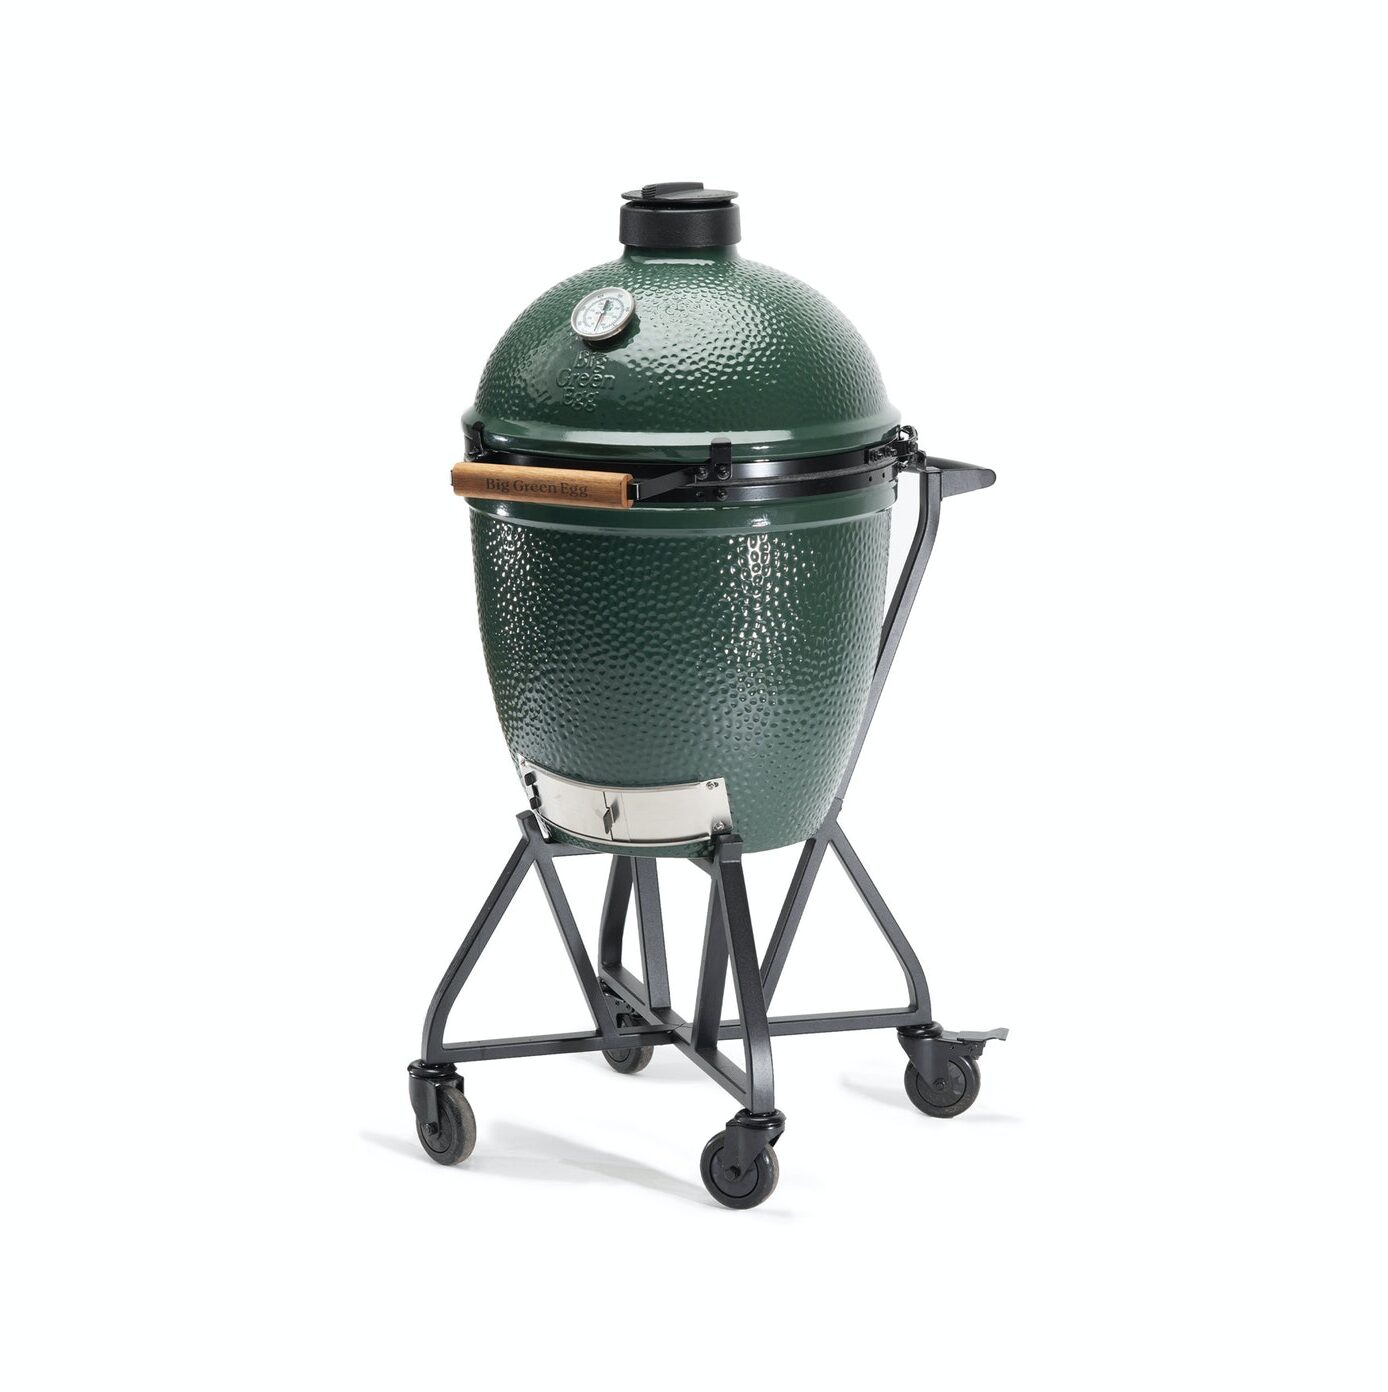 Big Green Egg In metal nest stand